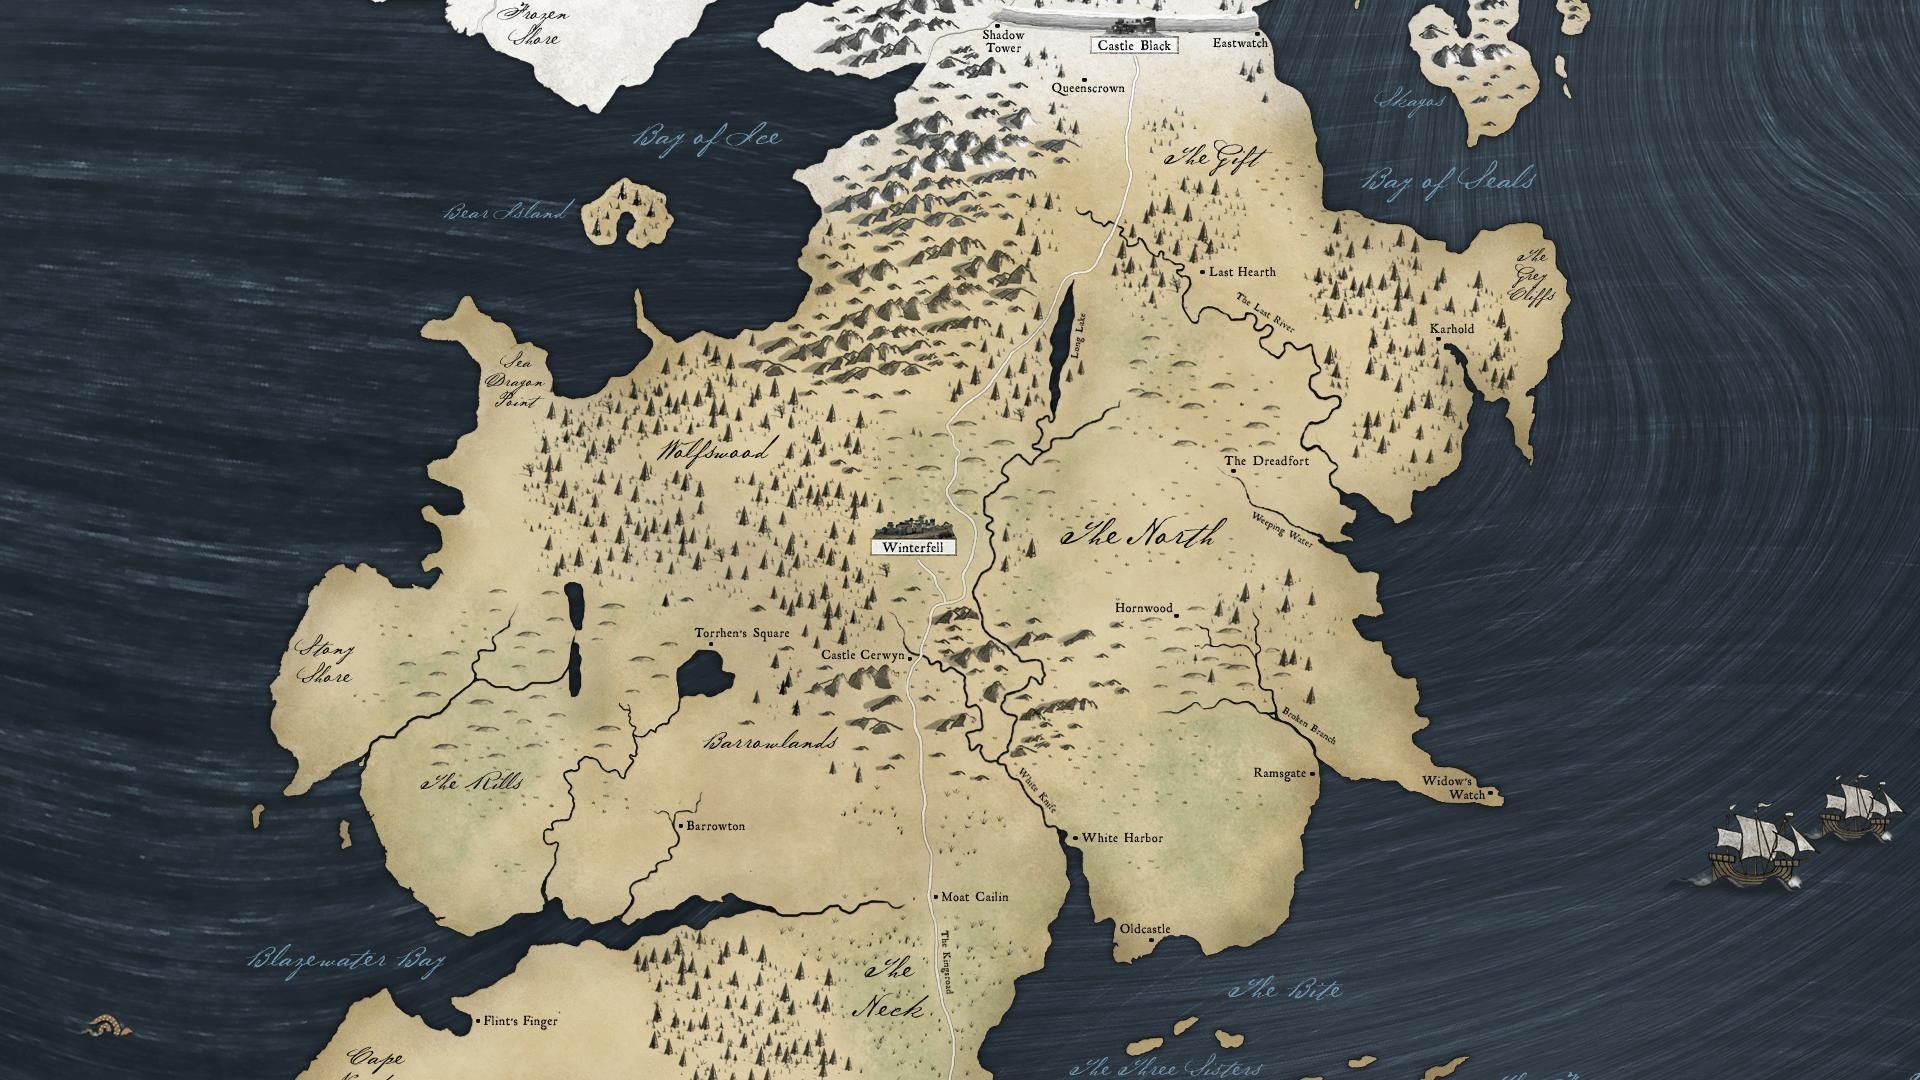 Game of Thrones Map Wallpaper (56+ images)